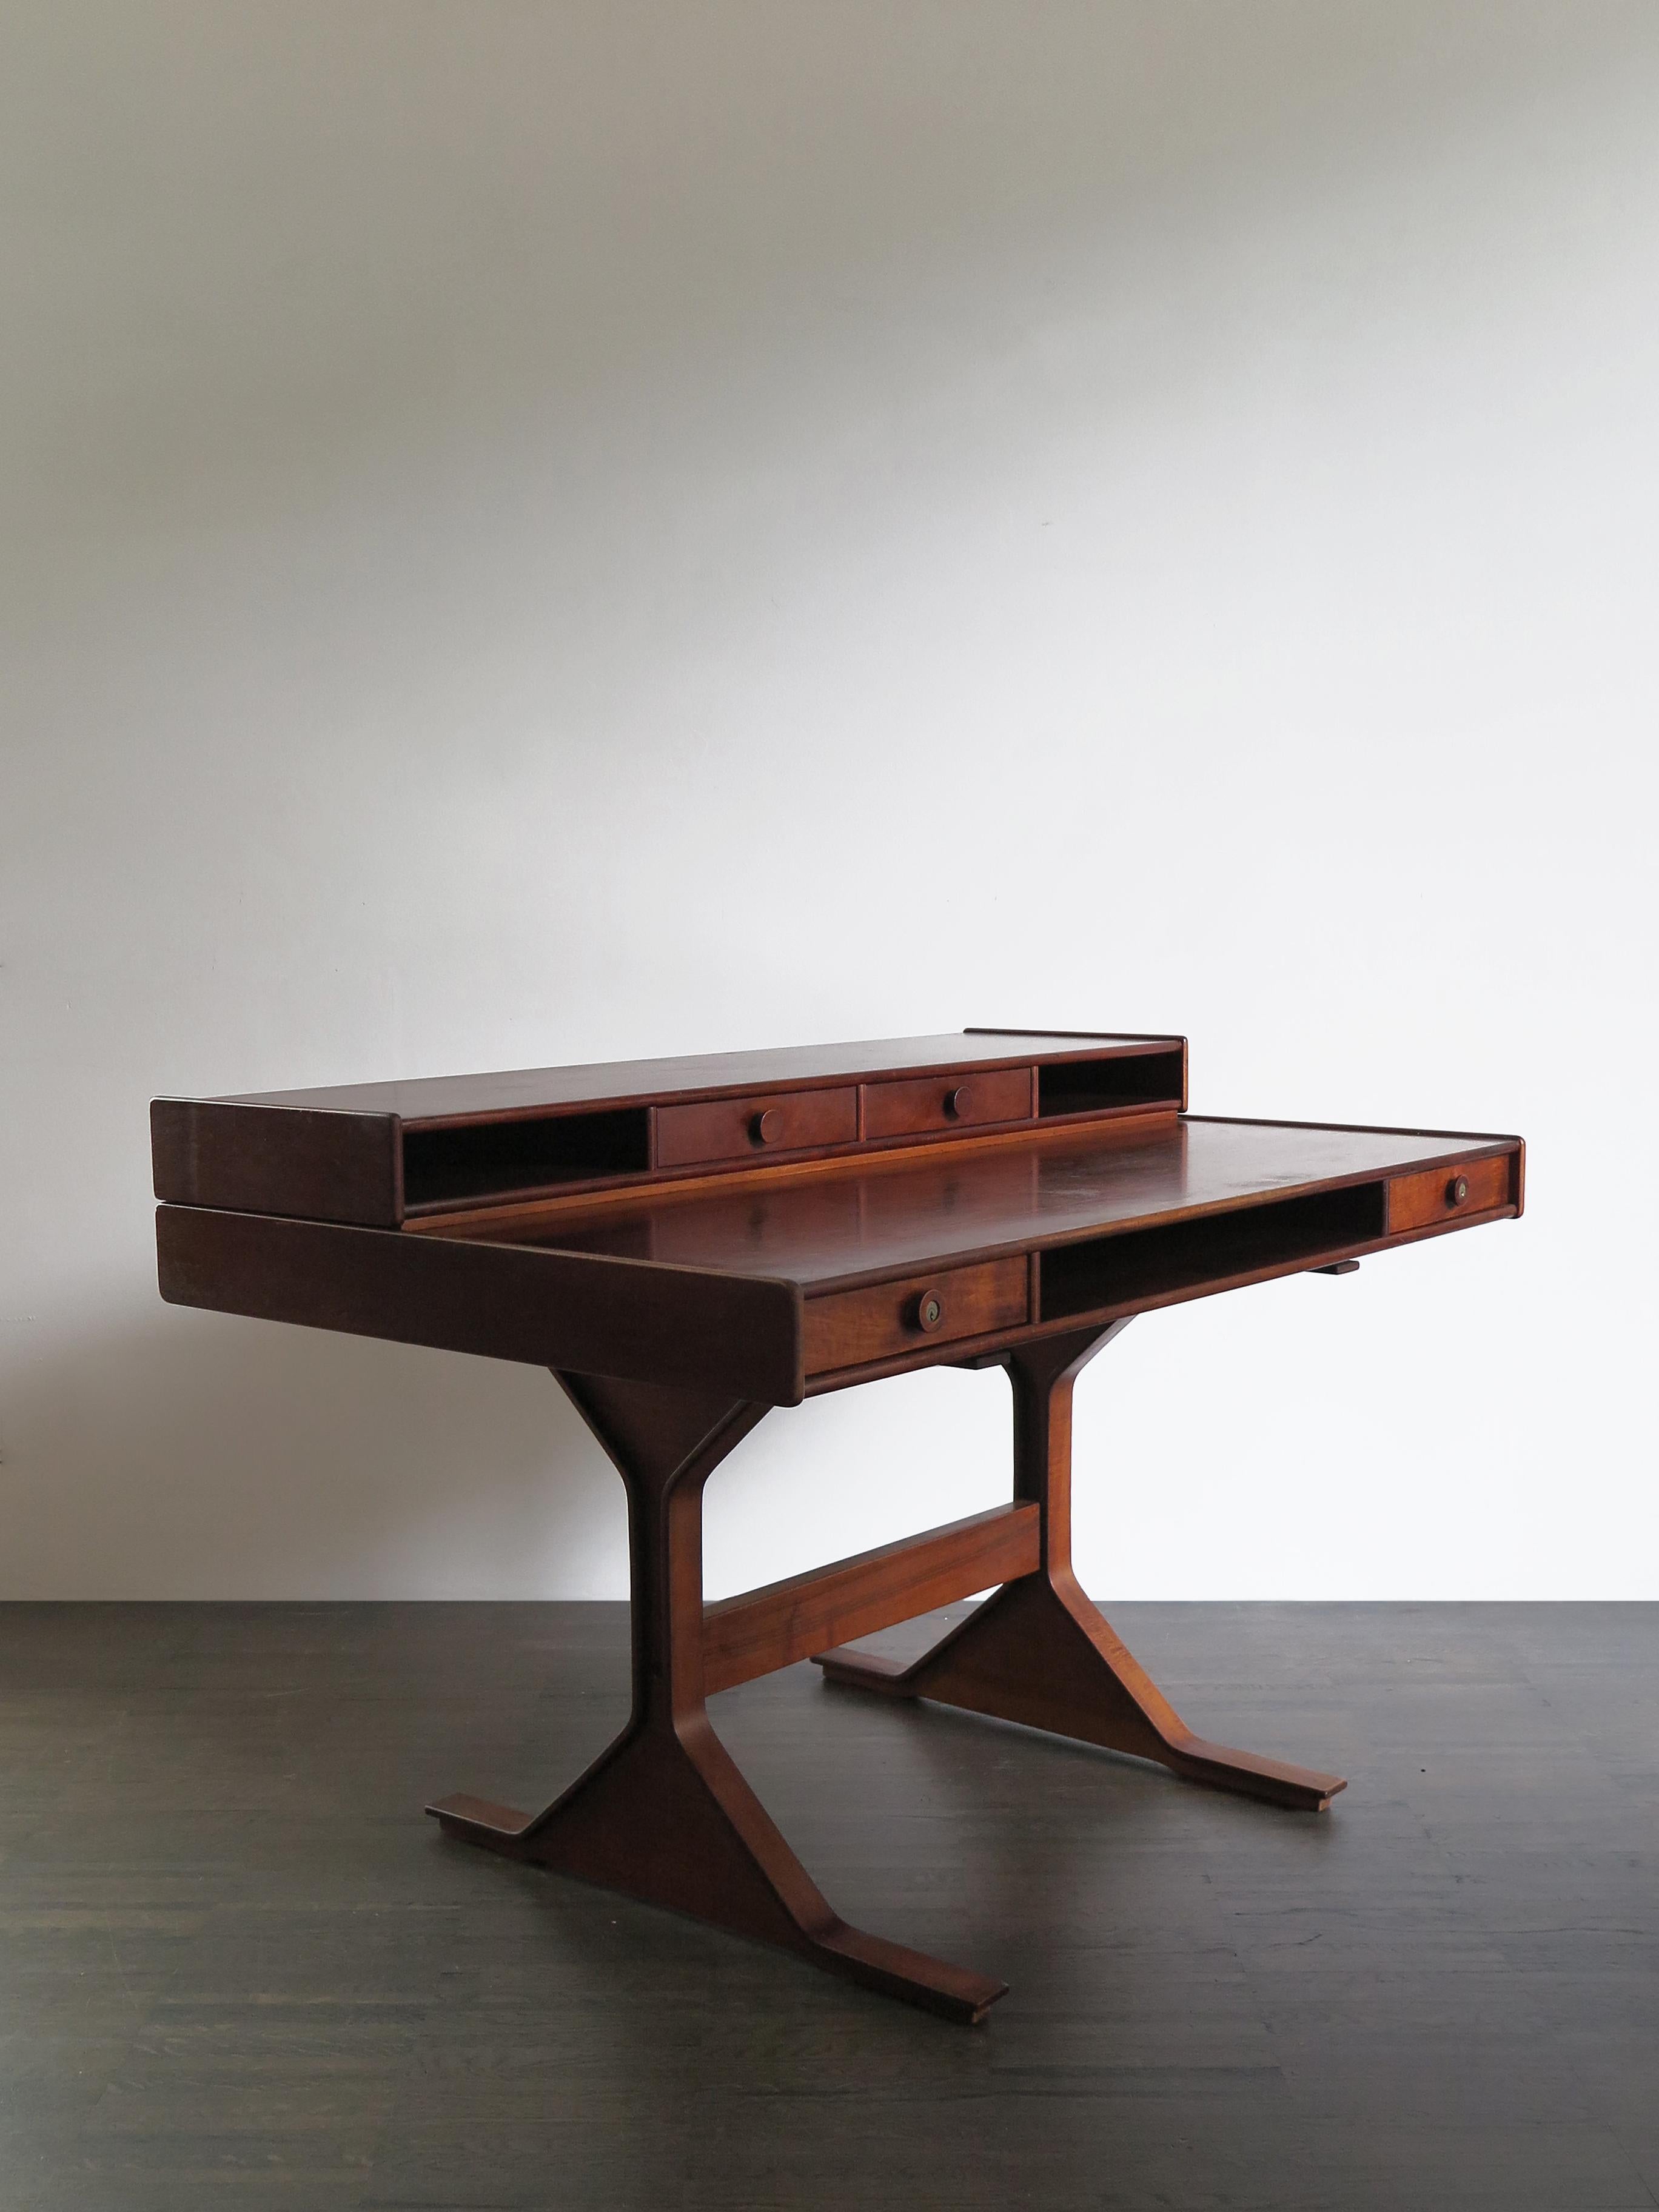 Italian midcentury modern design wood desk designed by Gianfranco Frattini and manufactured by Bernini from 1957.
Please note that the desk is original of the period and this shows normal signs of age and use.